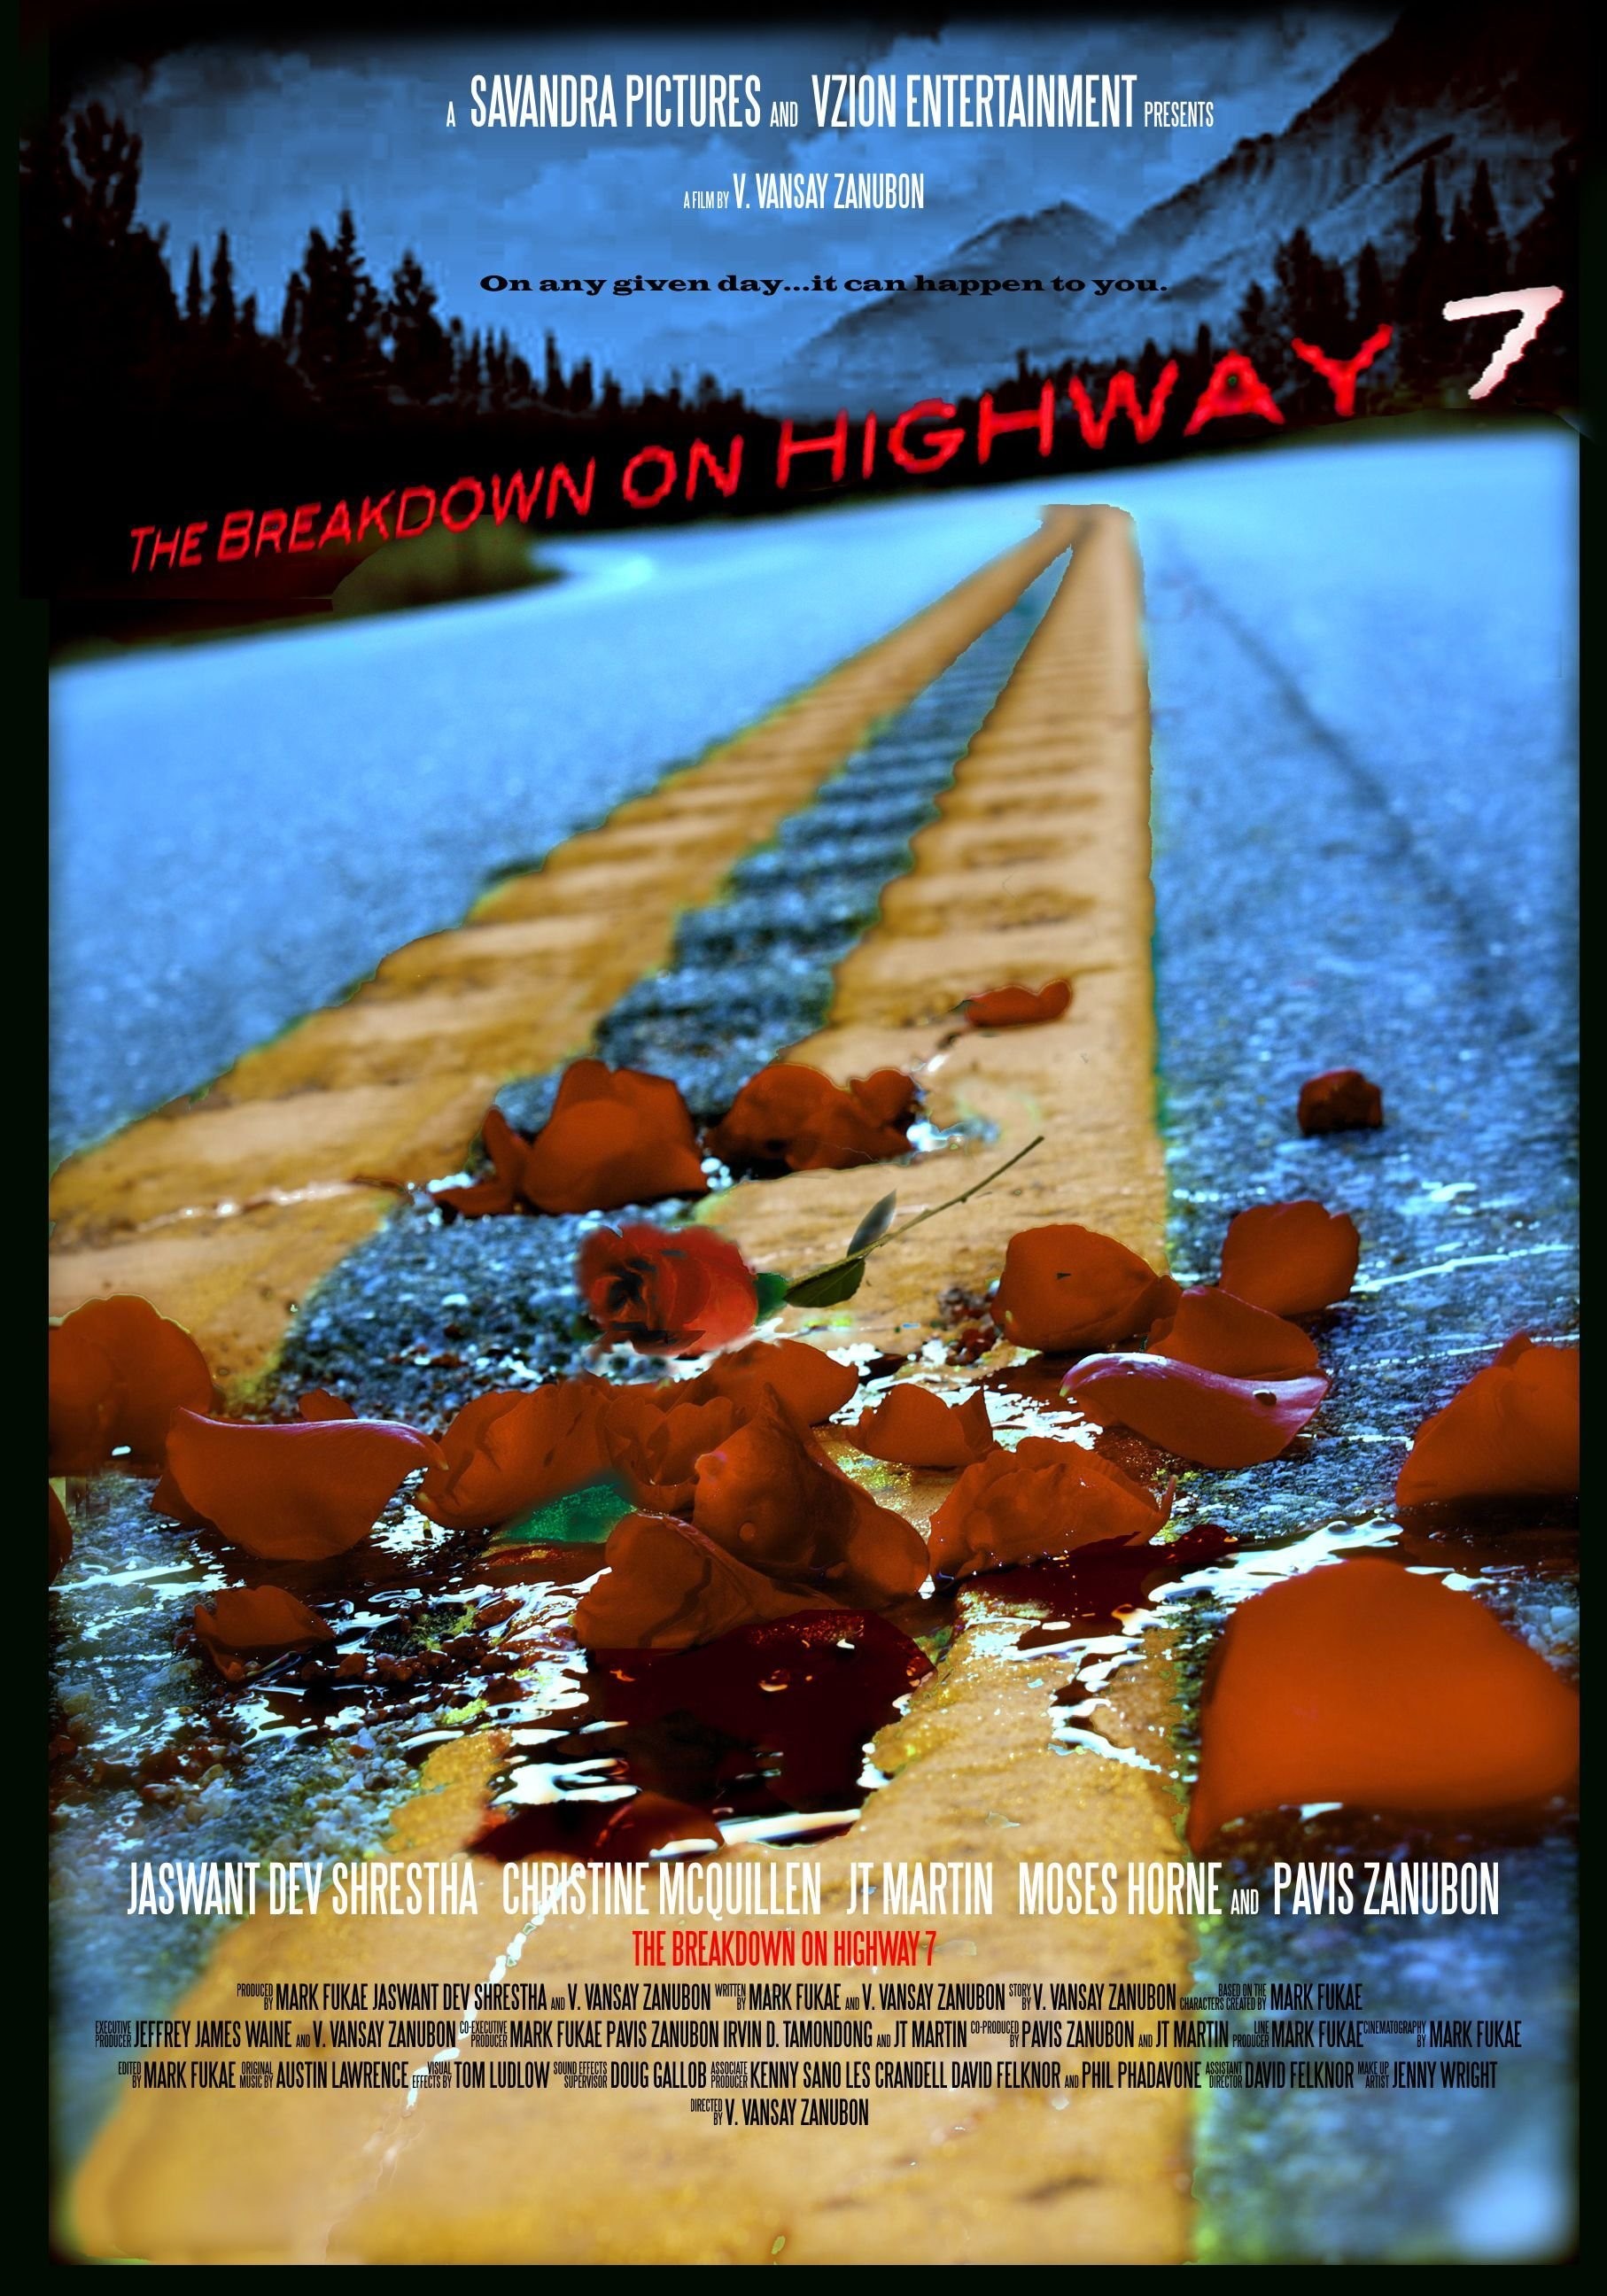 Mega Sized Movie Poster Image for The Breakdown on Highway 7